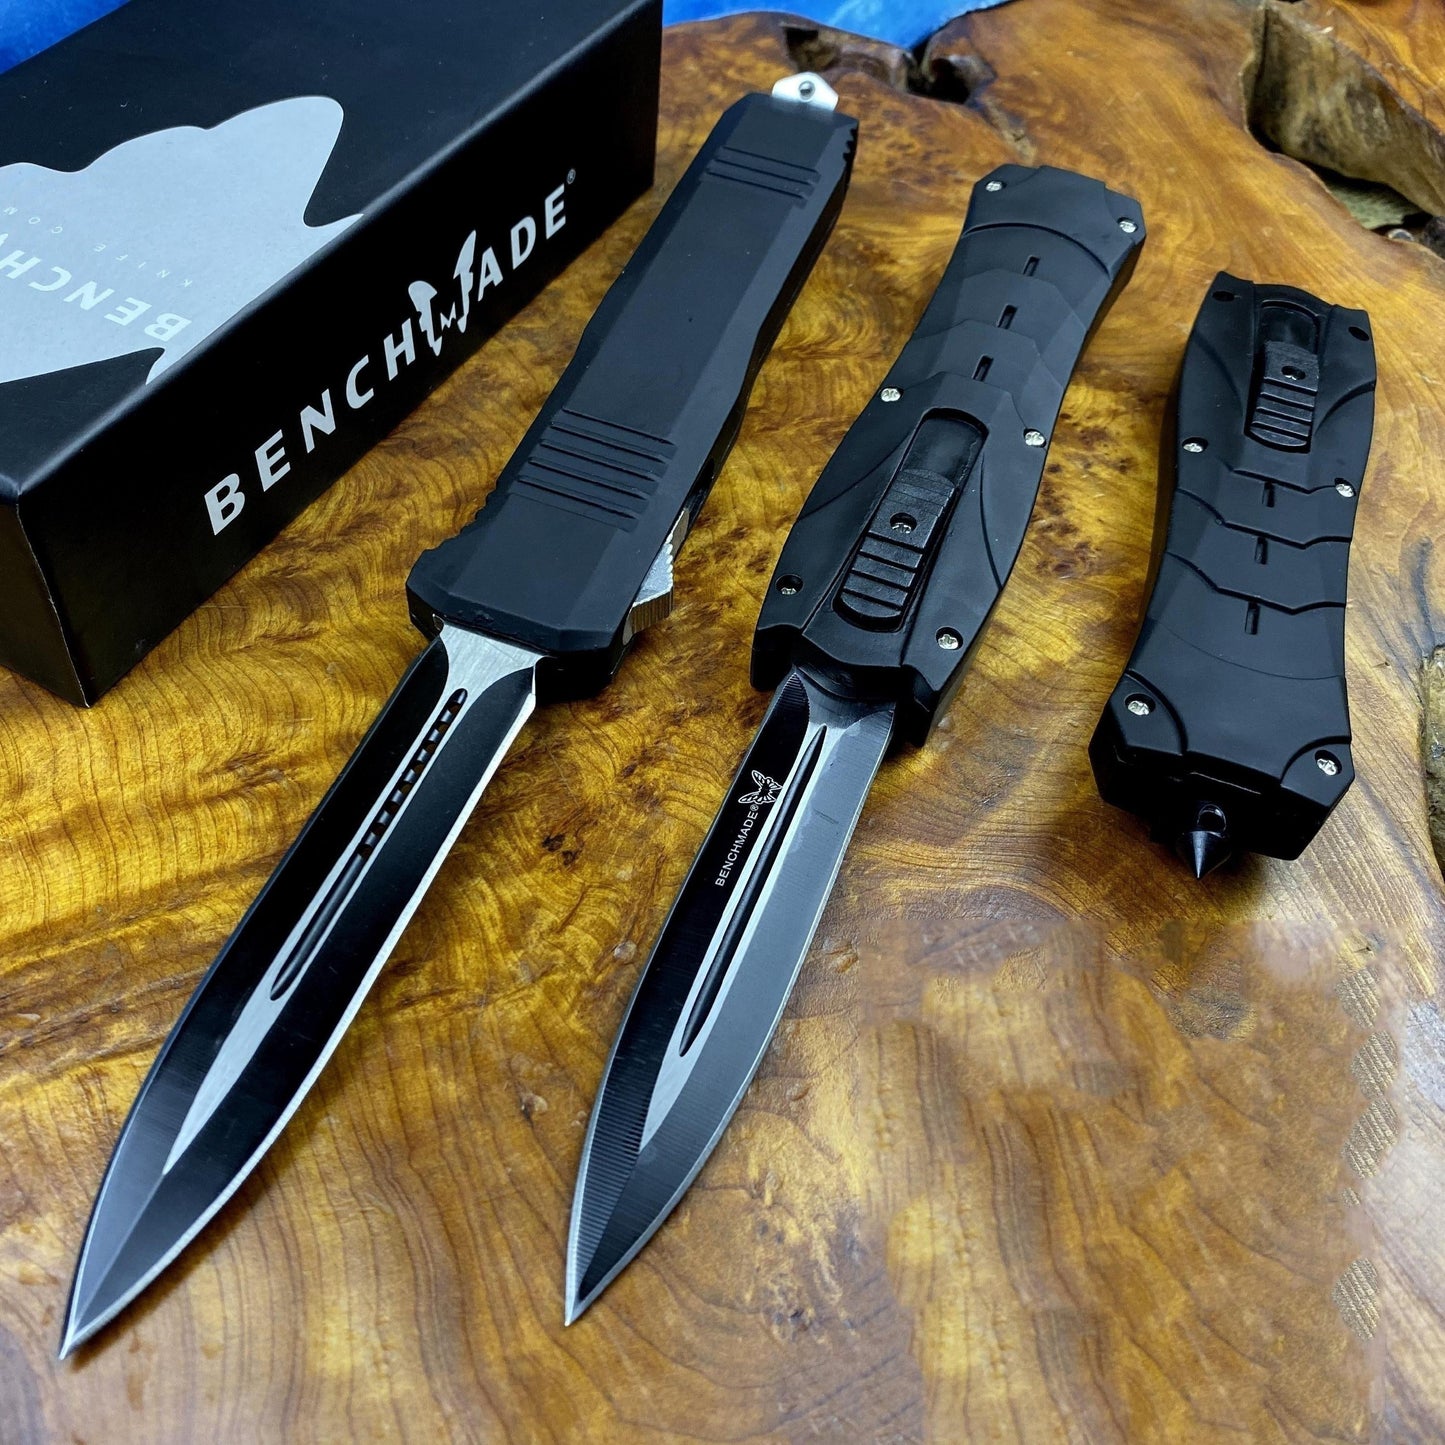 Benchmade C07 Tactical Knives AUTO EDC Spring Assist Knife Fixed 440 Blade Double Edge Survival Camping Hunting Cutting Fast Opening